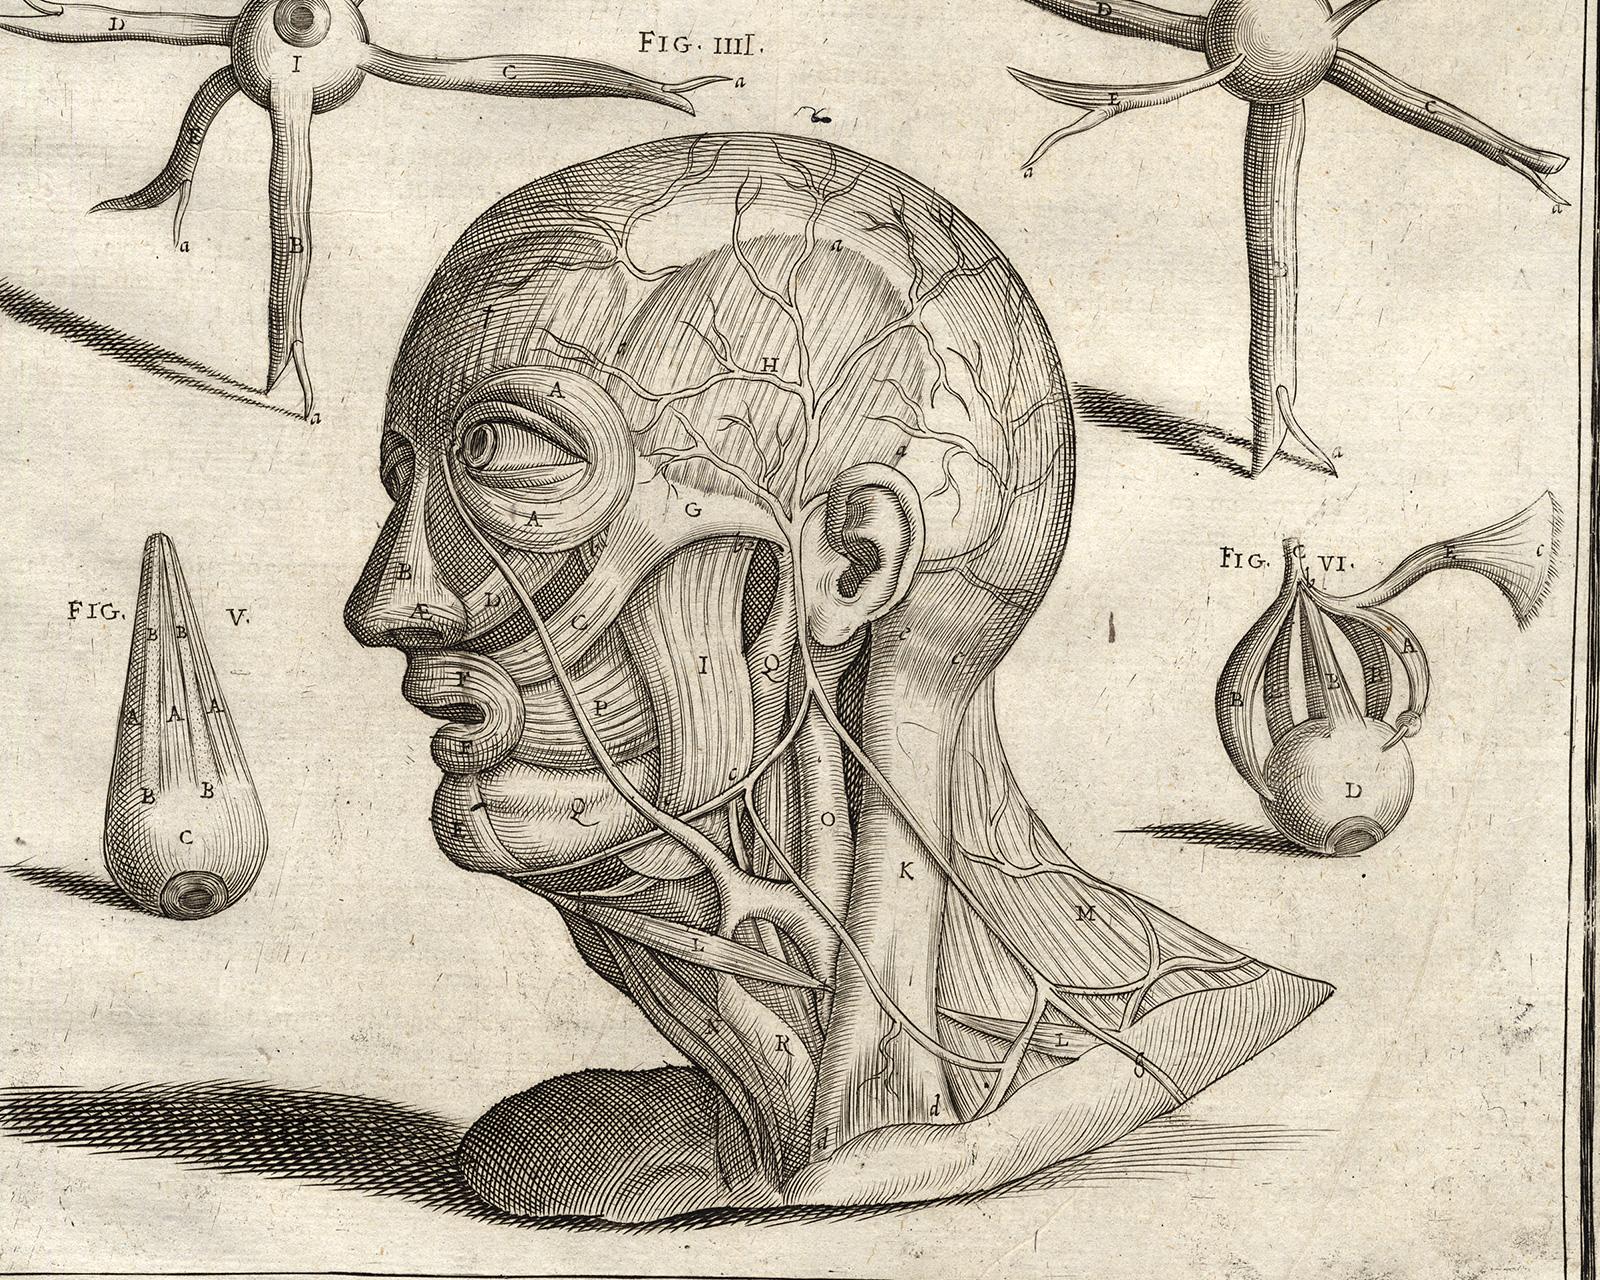 Anatomical print - human head muscles - by Spigelius - Engraving - 17th c - Old Masters Print by Adrianus Spigelius